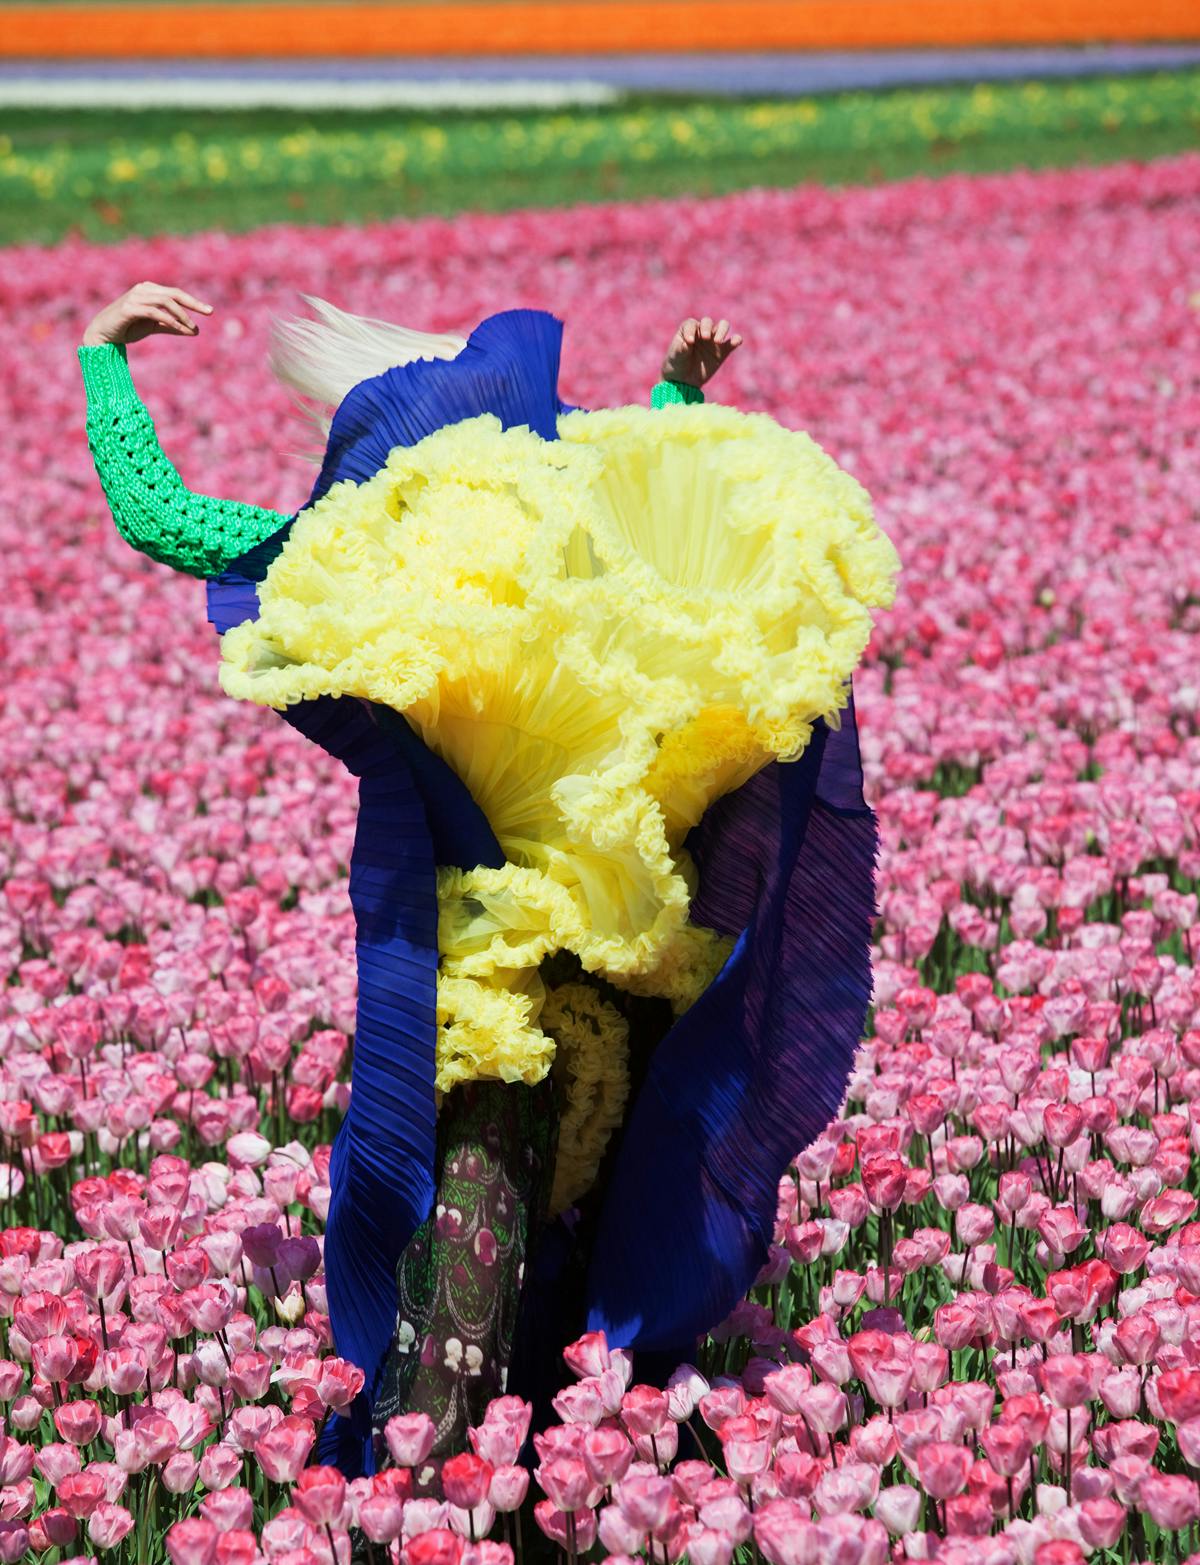 New book from Viviane Sassen explores her relationship with her